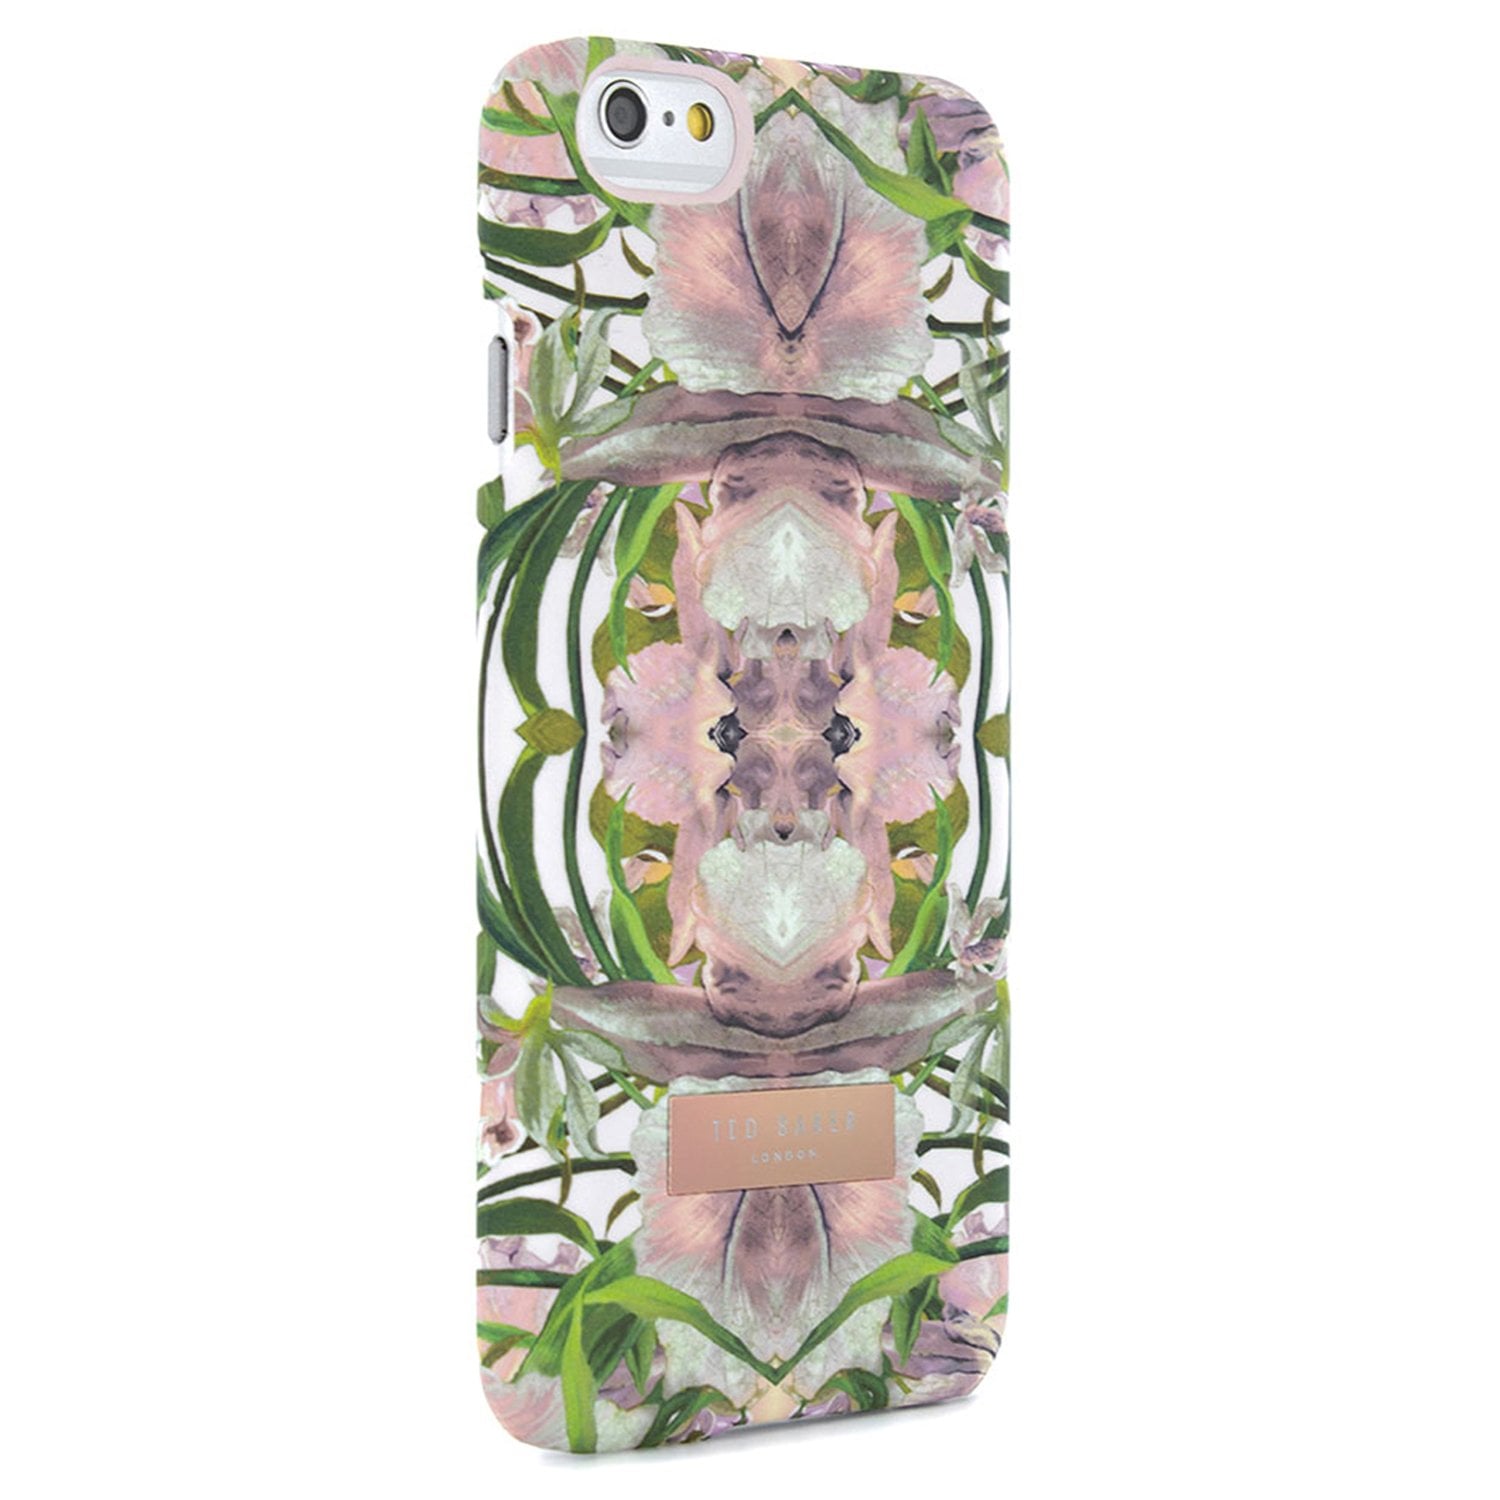 vijandigheid roem rit Ted Baker London 'Slippi' iPhone 6 & 6s Case ($40) | 20 of the Most  Gorgeous iPhone 6S Cases We Could Find | POPSUGAR Tech Photo 21